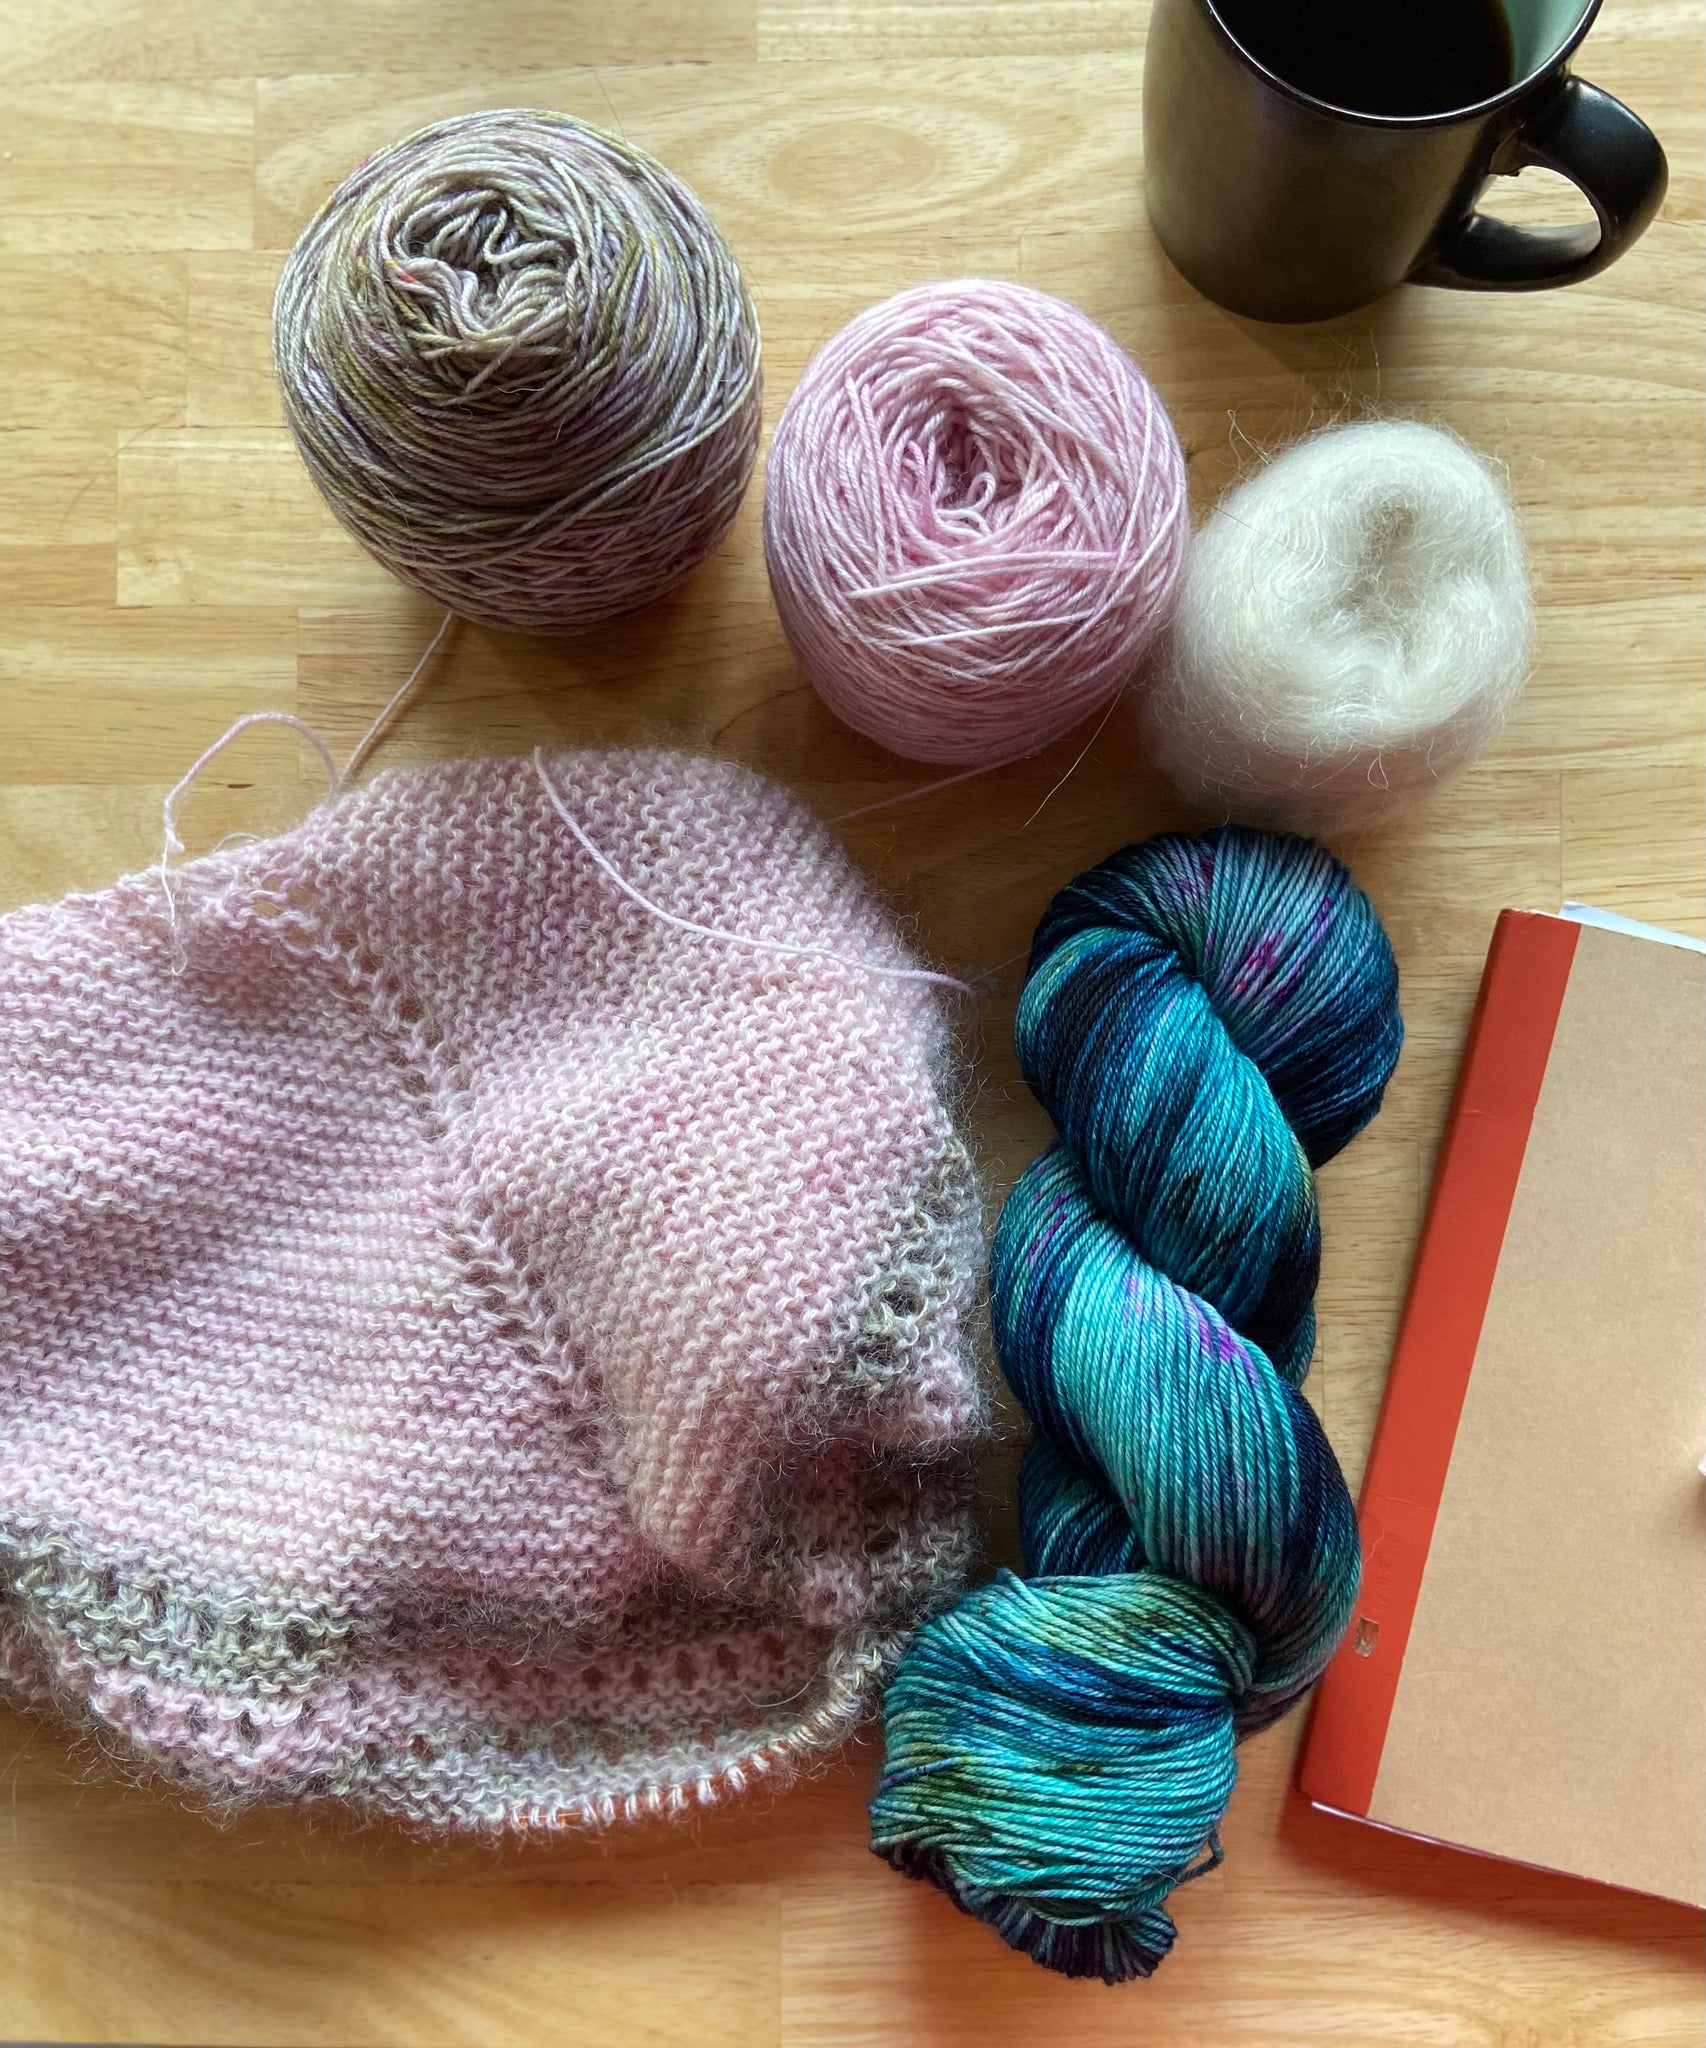 Finding Time to Knit